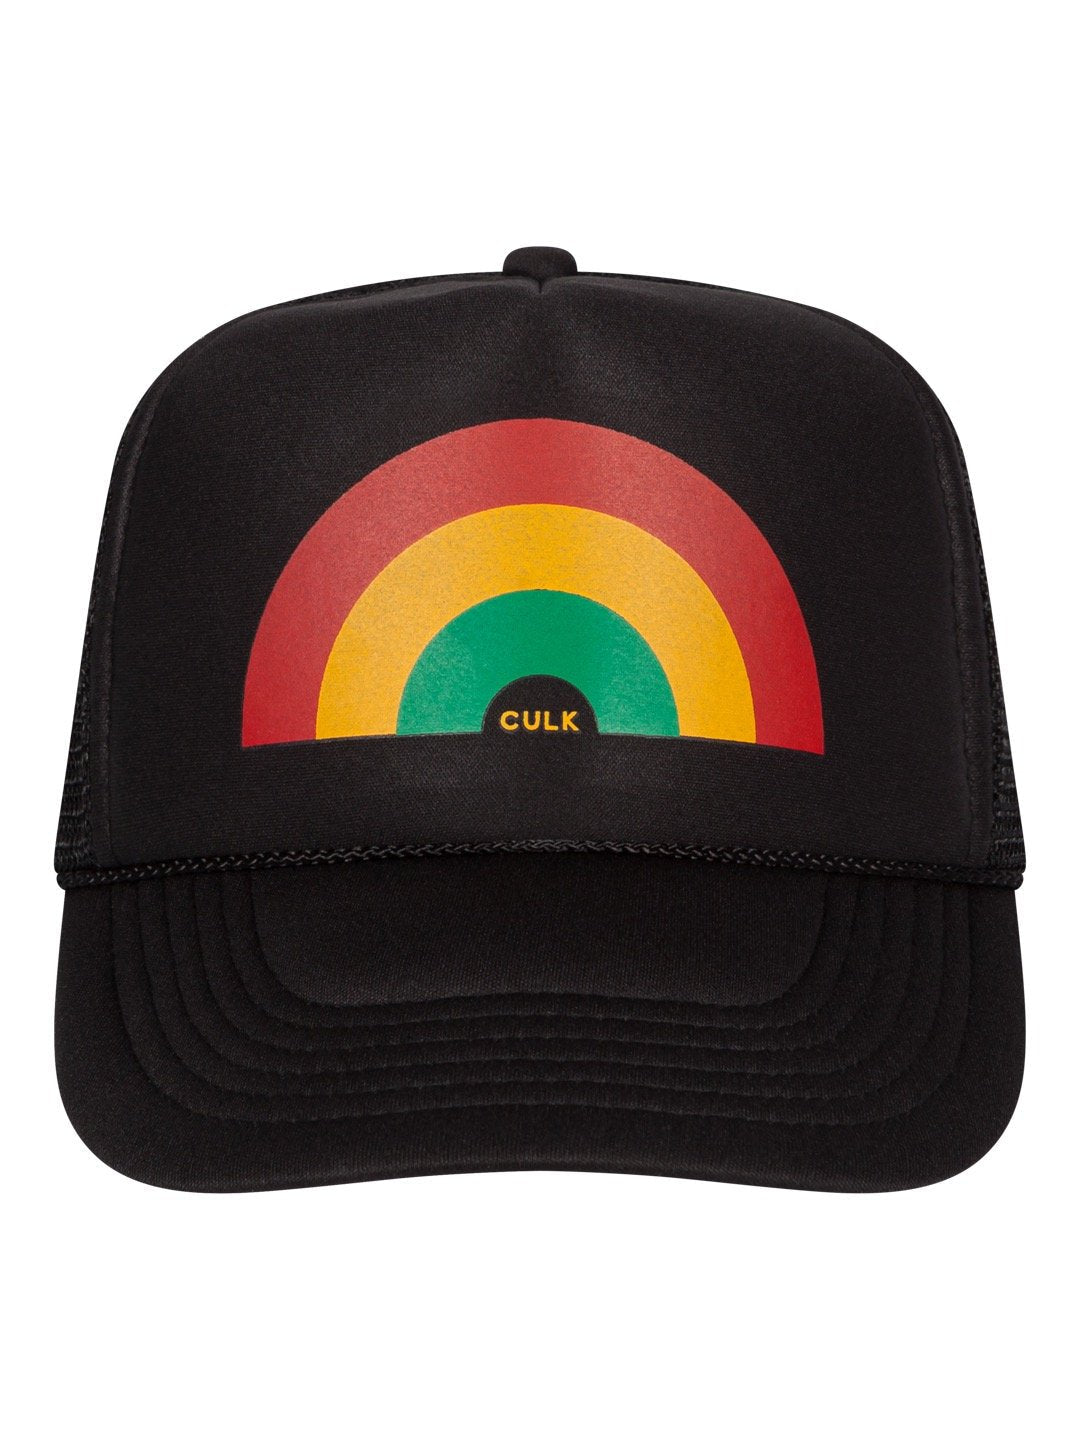 Rainbow Trucker Hat - Multiple Colors - The Lake and Company